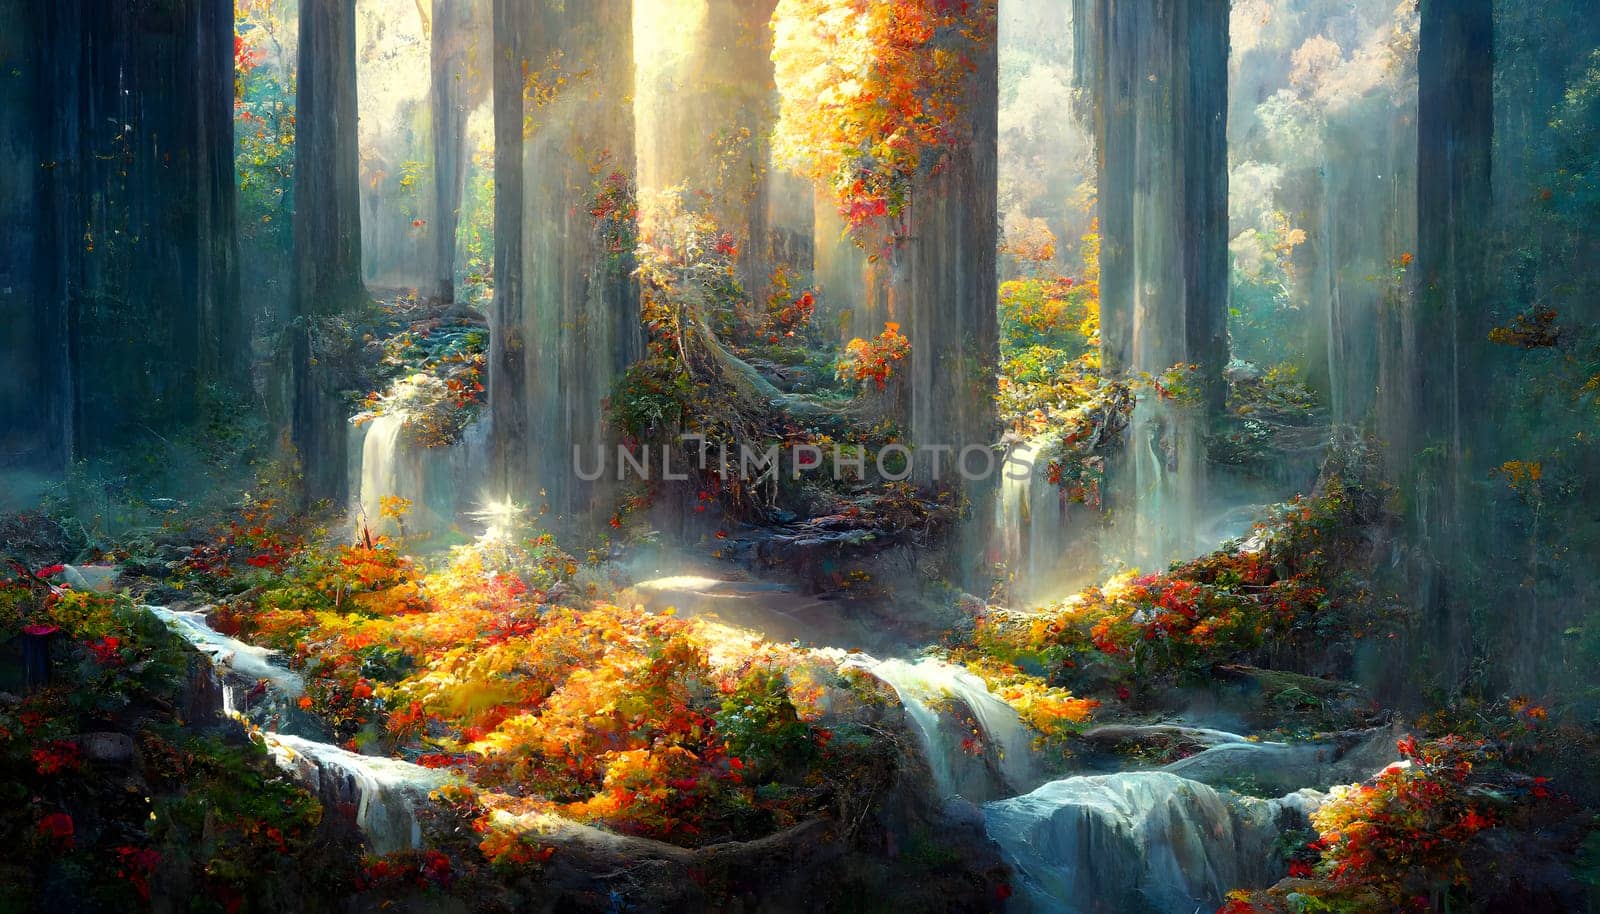 fantasy autumn waterfalls scenery at sunny day, neural network generated art. Digitally generated image. Not based on any actual scene or pattern.